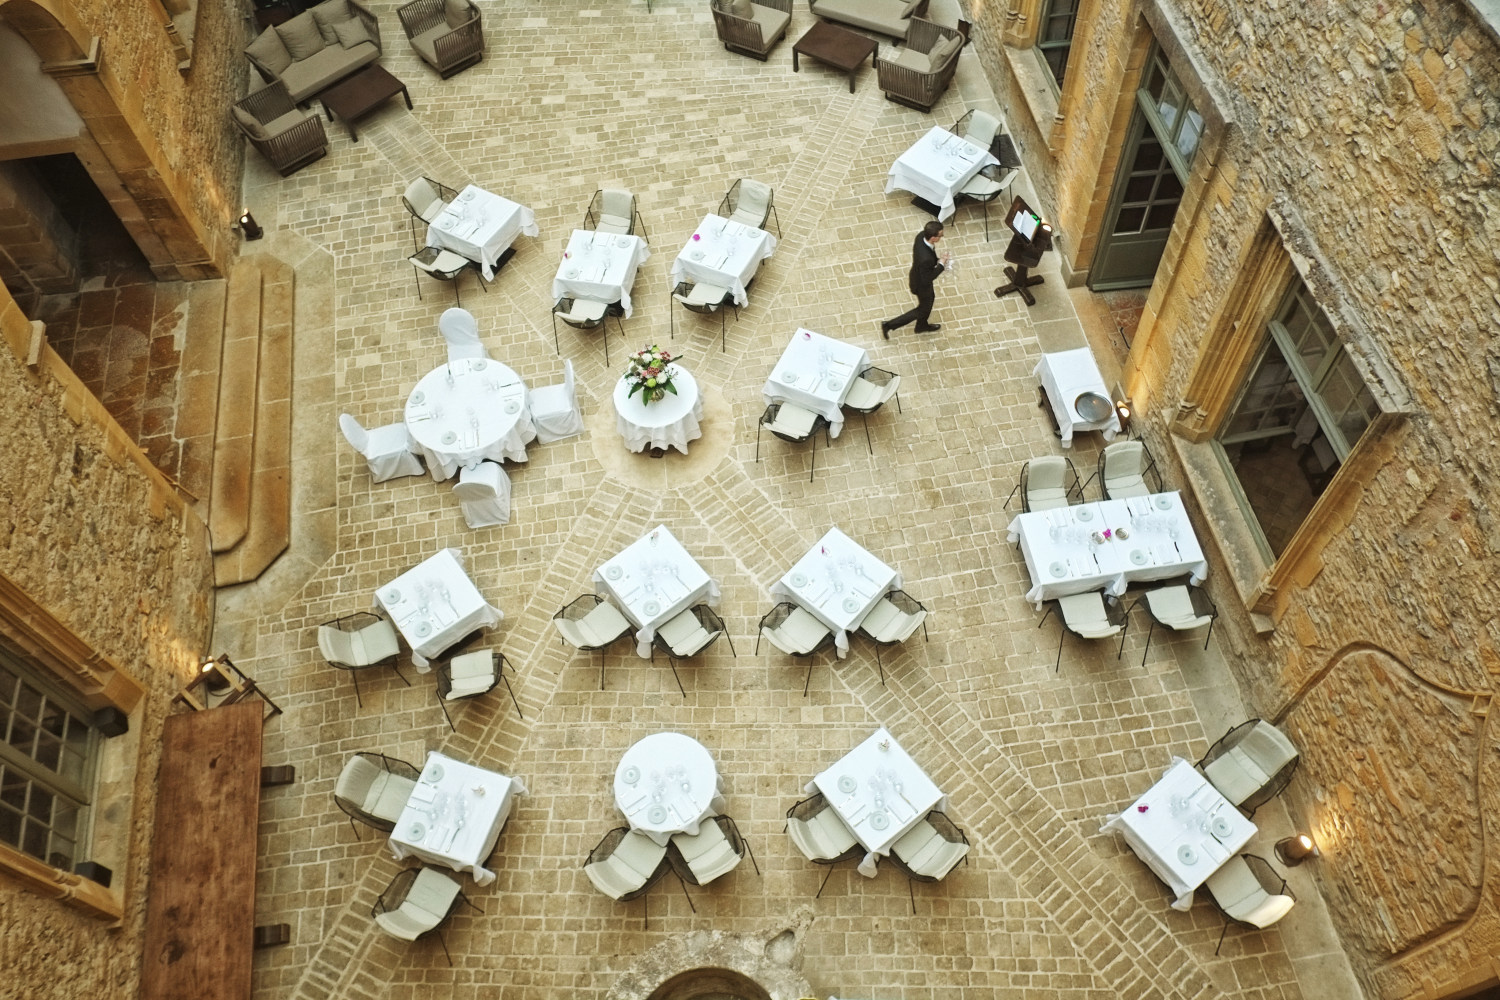 The courtyard of Château de Bagnols with tables set for lunch at restaurant 1217. Hotel and Travel photography by Kent Johnson.